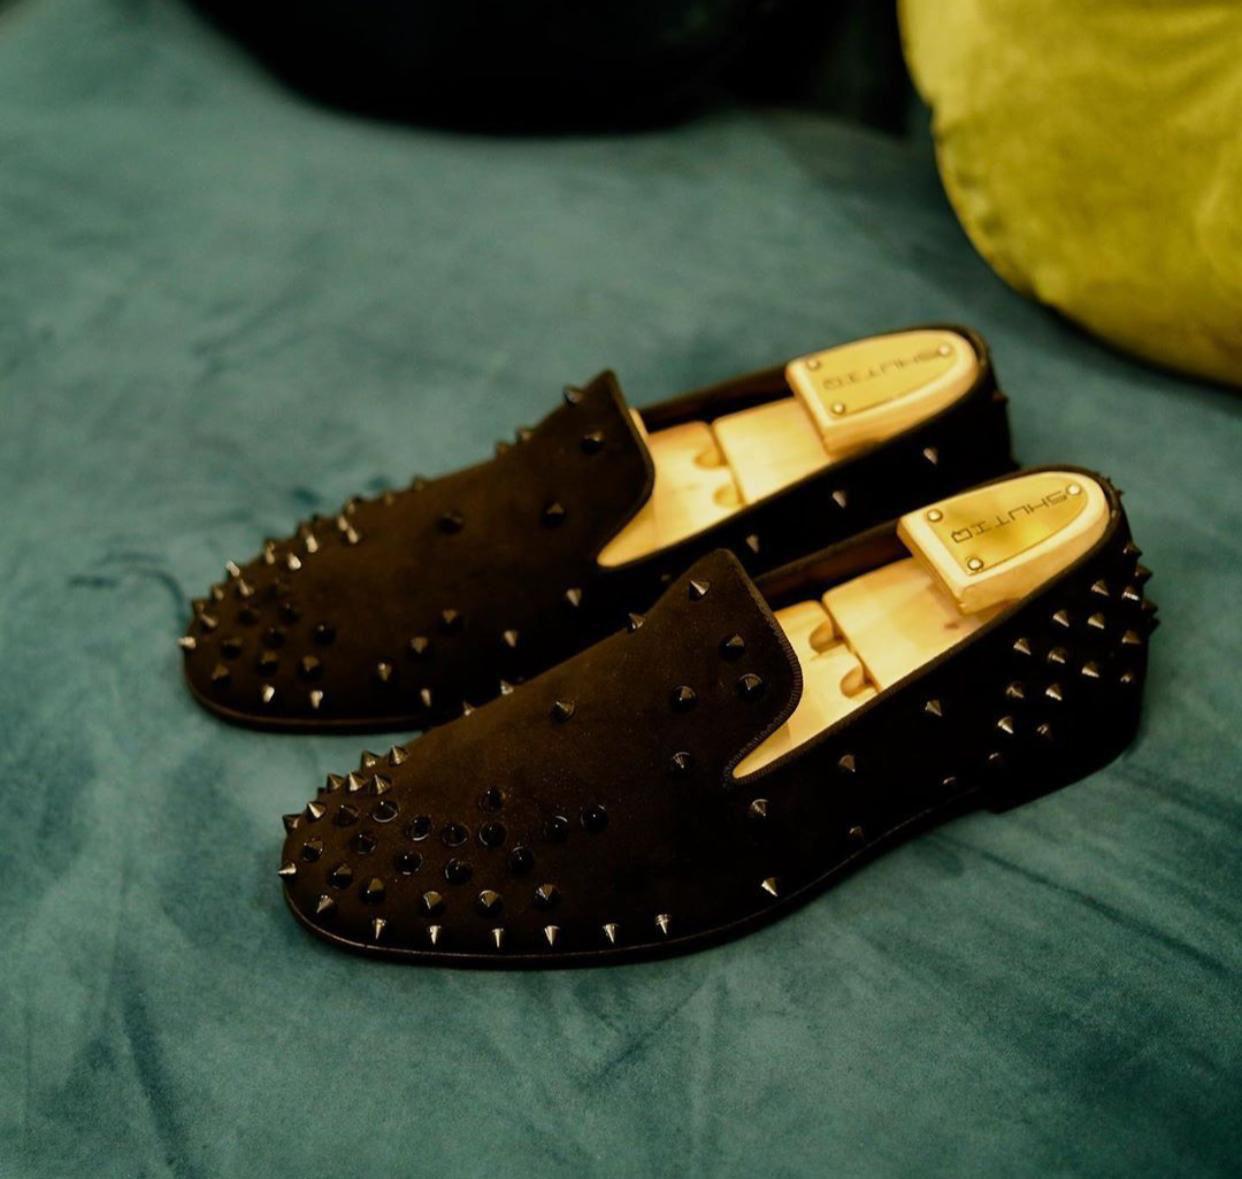 Black Studded Moccasins Very High Quality For Partywear And Casualwear Loafer- FunkyTradition